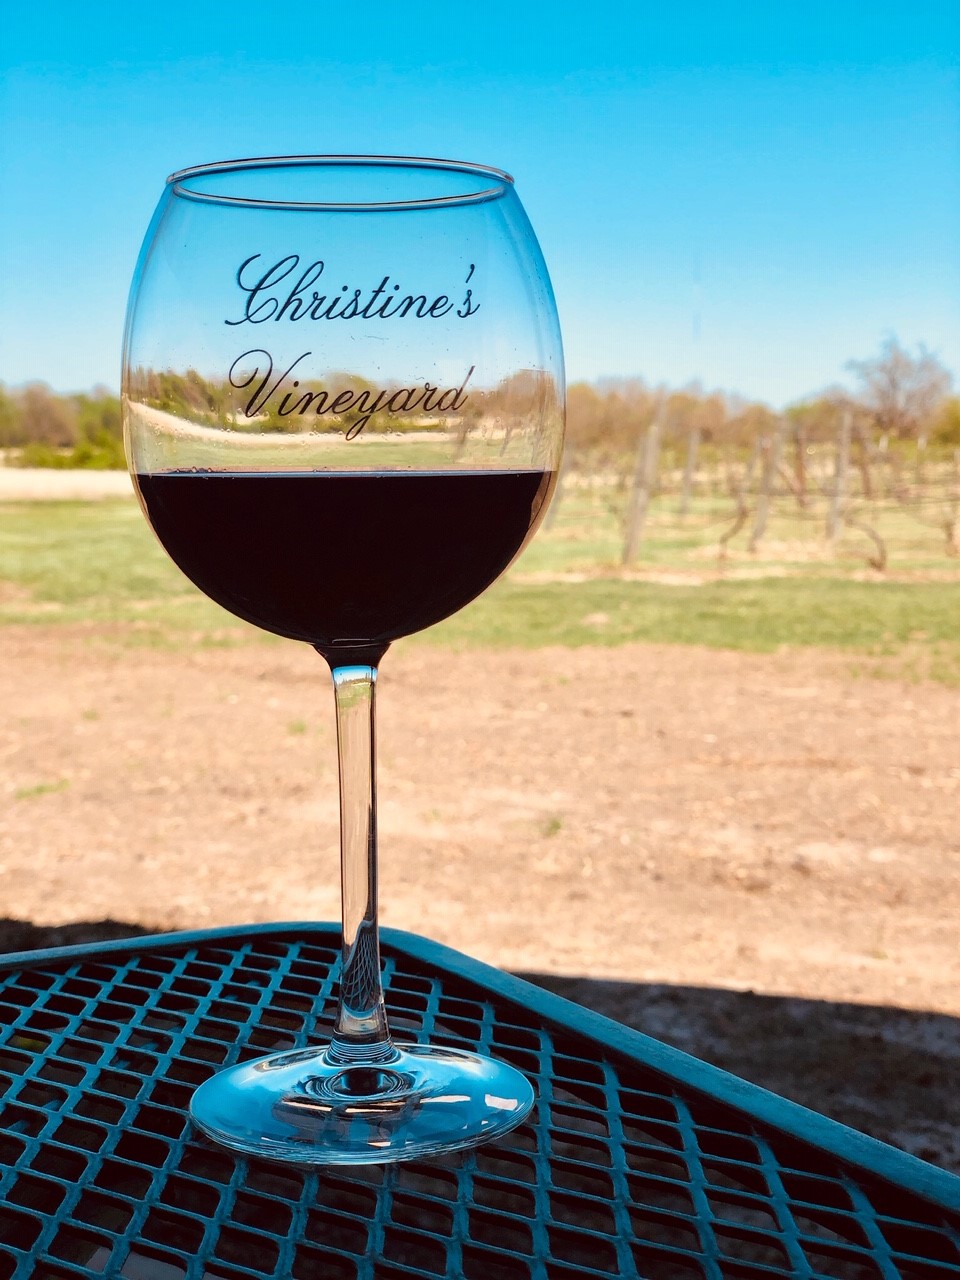 Christine's Vineyard - outdoor photo of wine glass with red wine inside it, on a patio table, with the vineyard visible in the background at daytime.